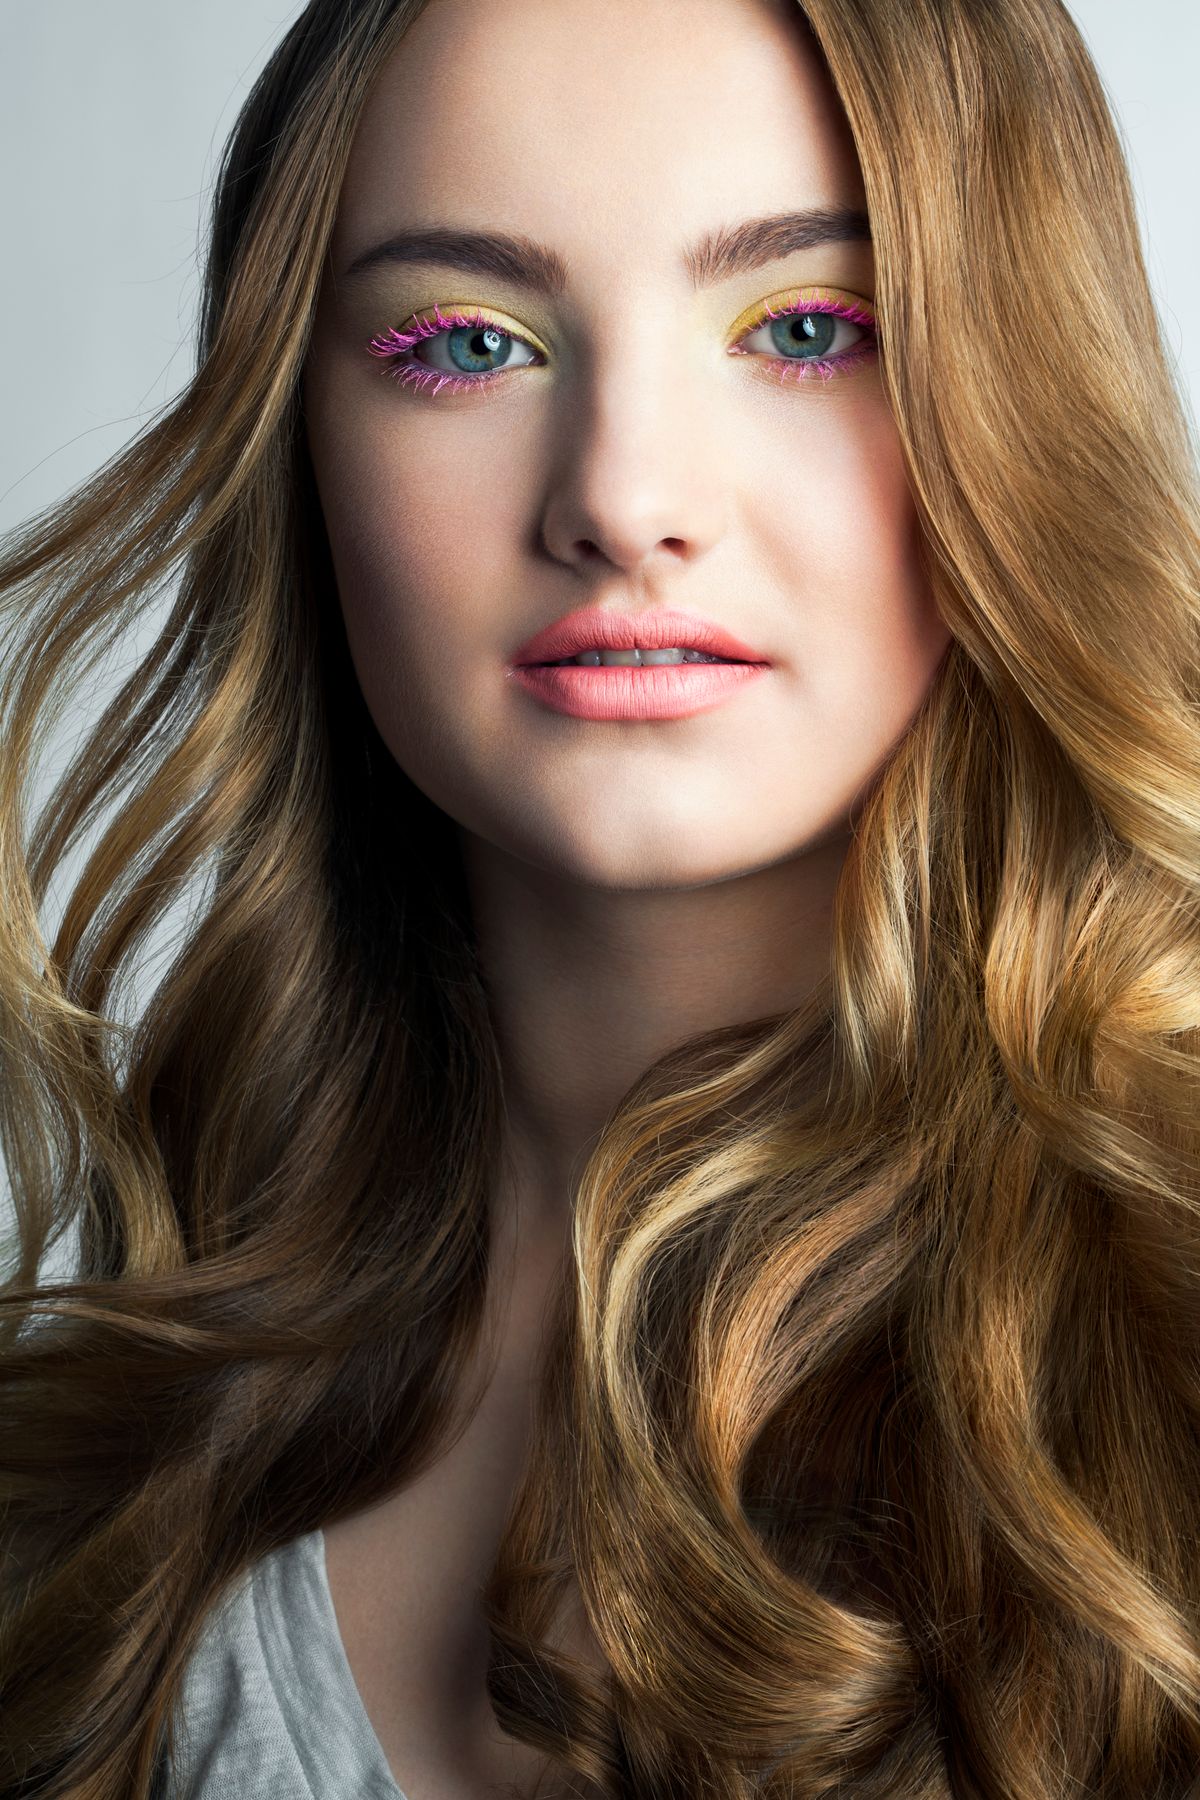 Teenage girl with colorful make up, portrait.